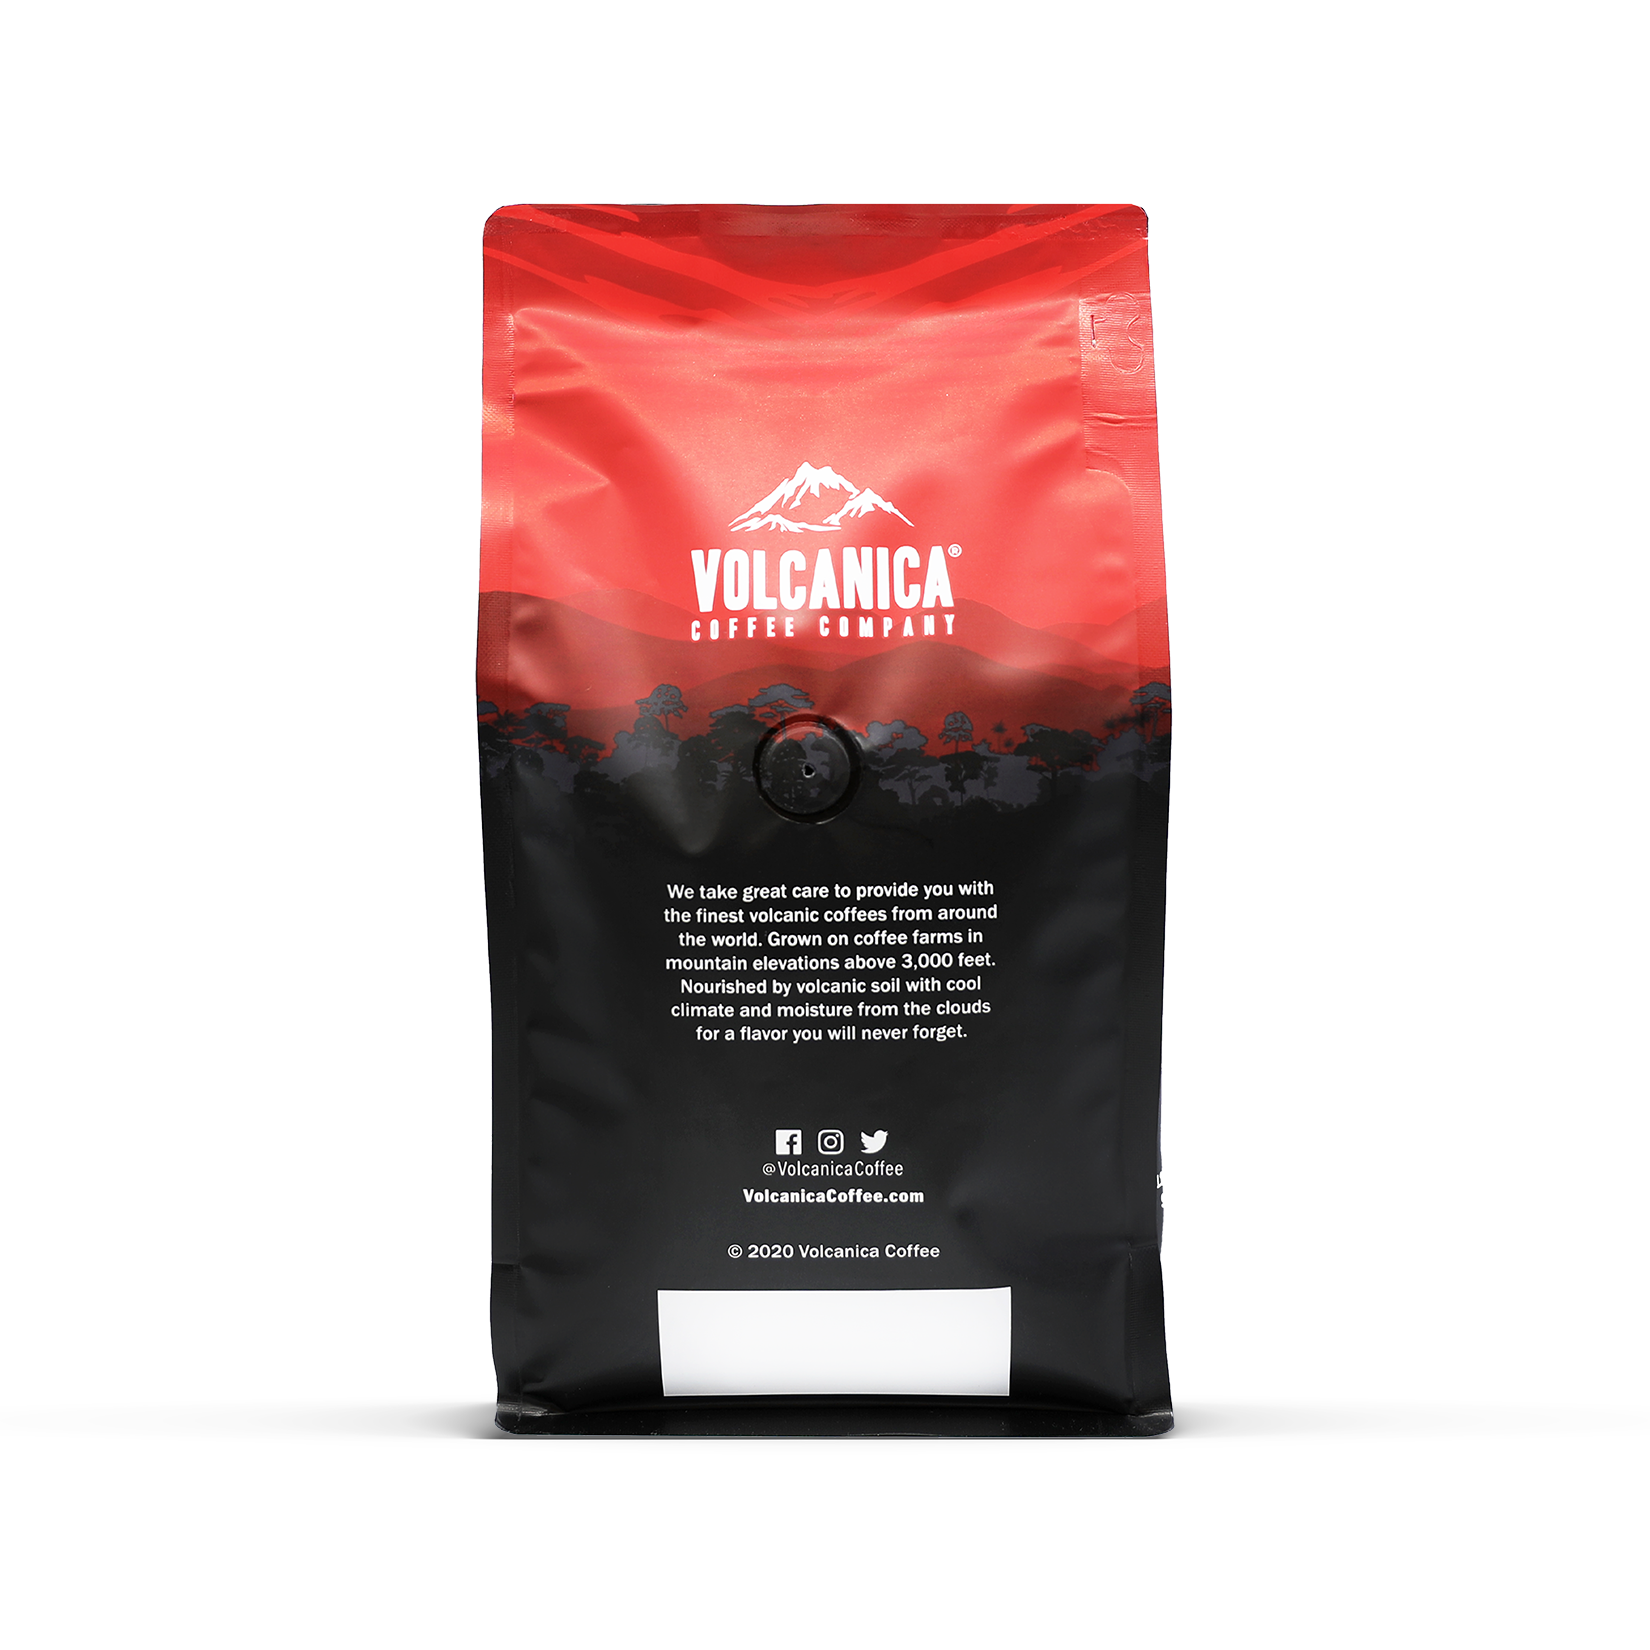 Rudolph Peppermint Stick Flavored Coffee - Volcanica Coffee